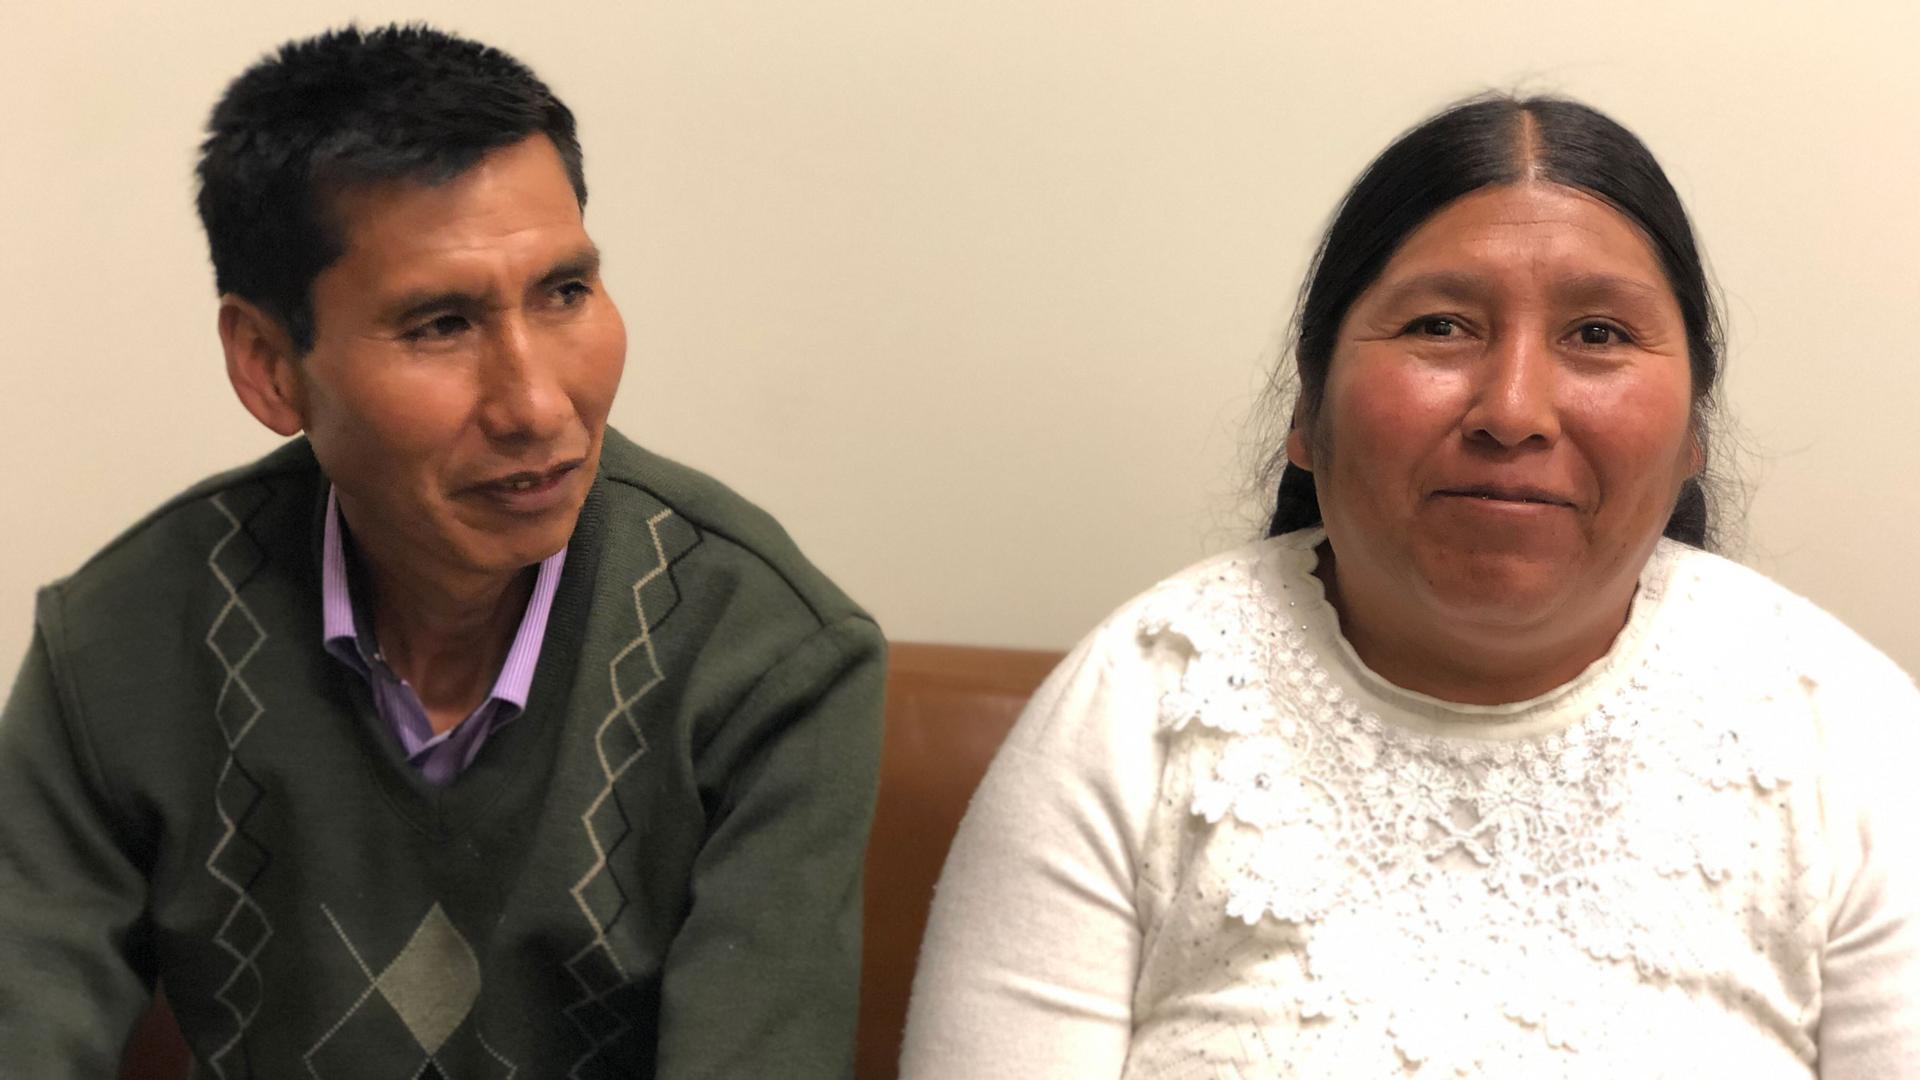 Etelvina Ramos Mamani and Eloy Rojas Mamani spoke with The World in Boston, after meeting with lawyers from Harvard’s International Human Rights Law Clinic.